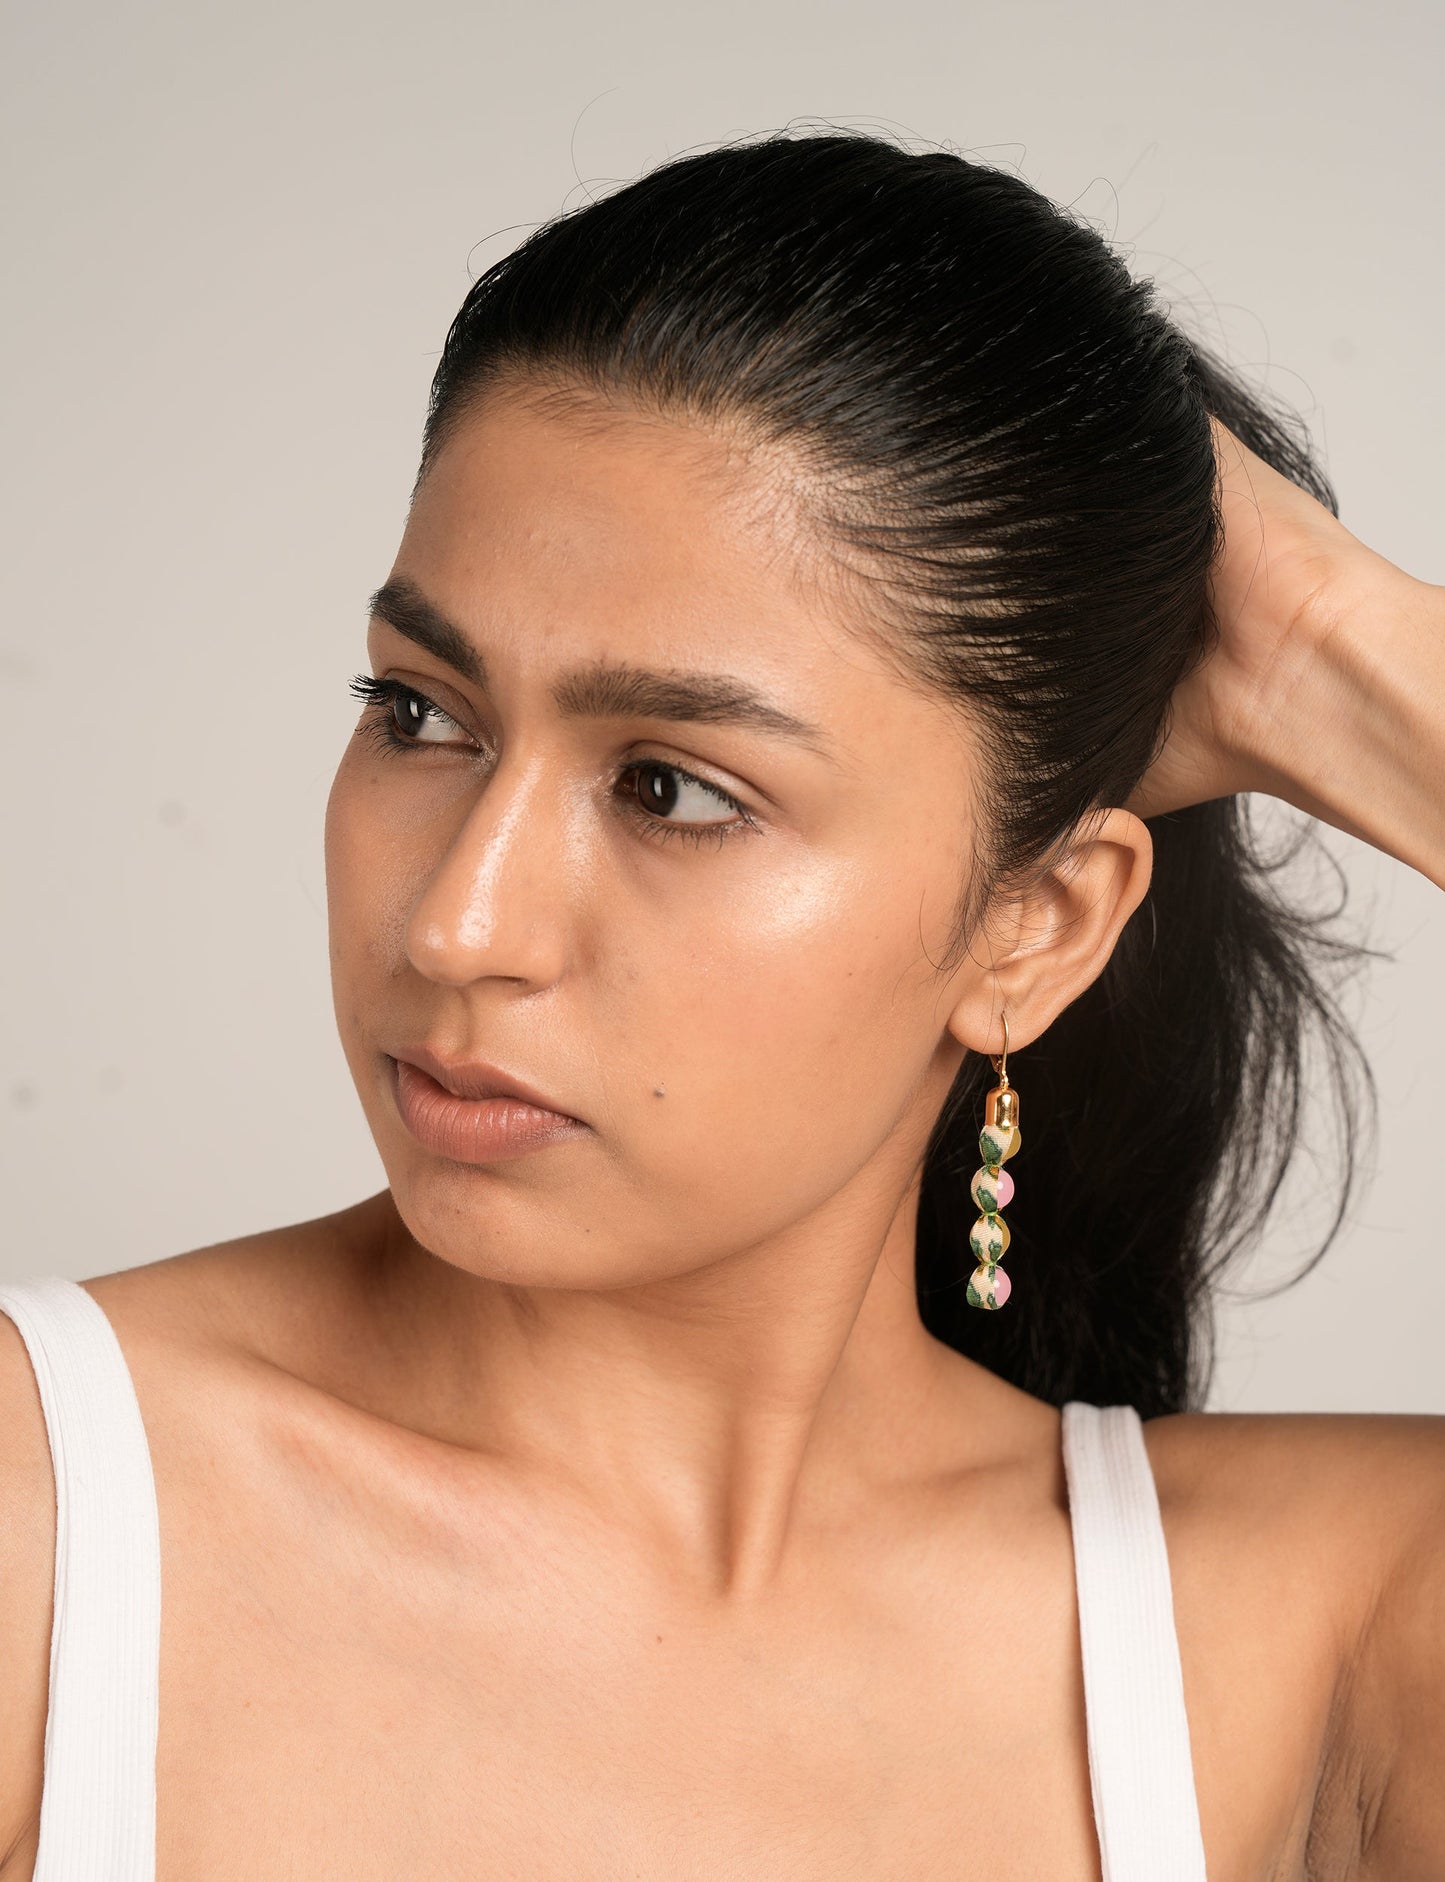 Experience the allure of Beaded Dangler Earrings, a fusion of recycled glass beads and pre-loved sari fabric. Skin-friendly with hypoallergenic hooks, these earrings bring a touch of sustainability to your accessory collection.